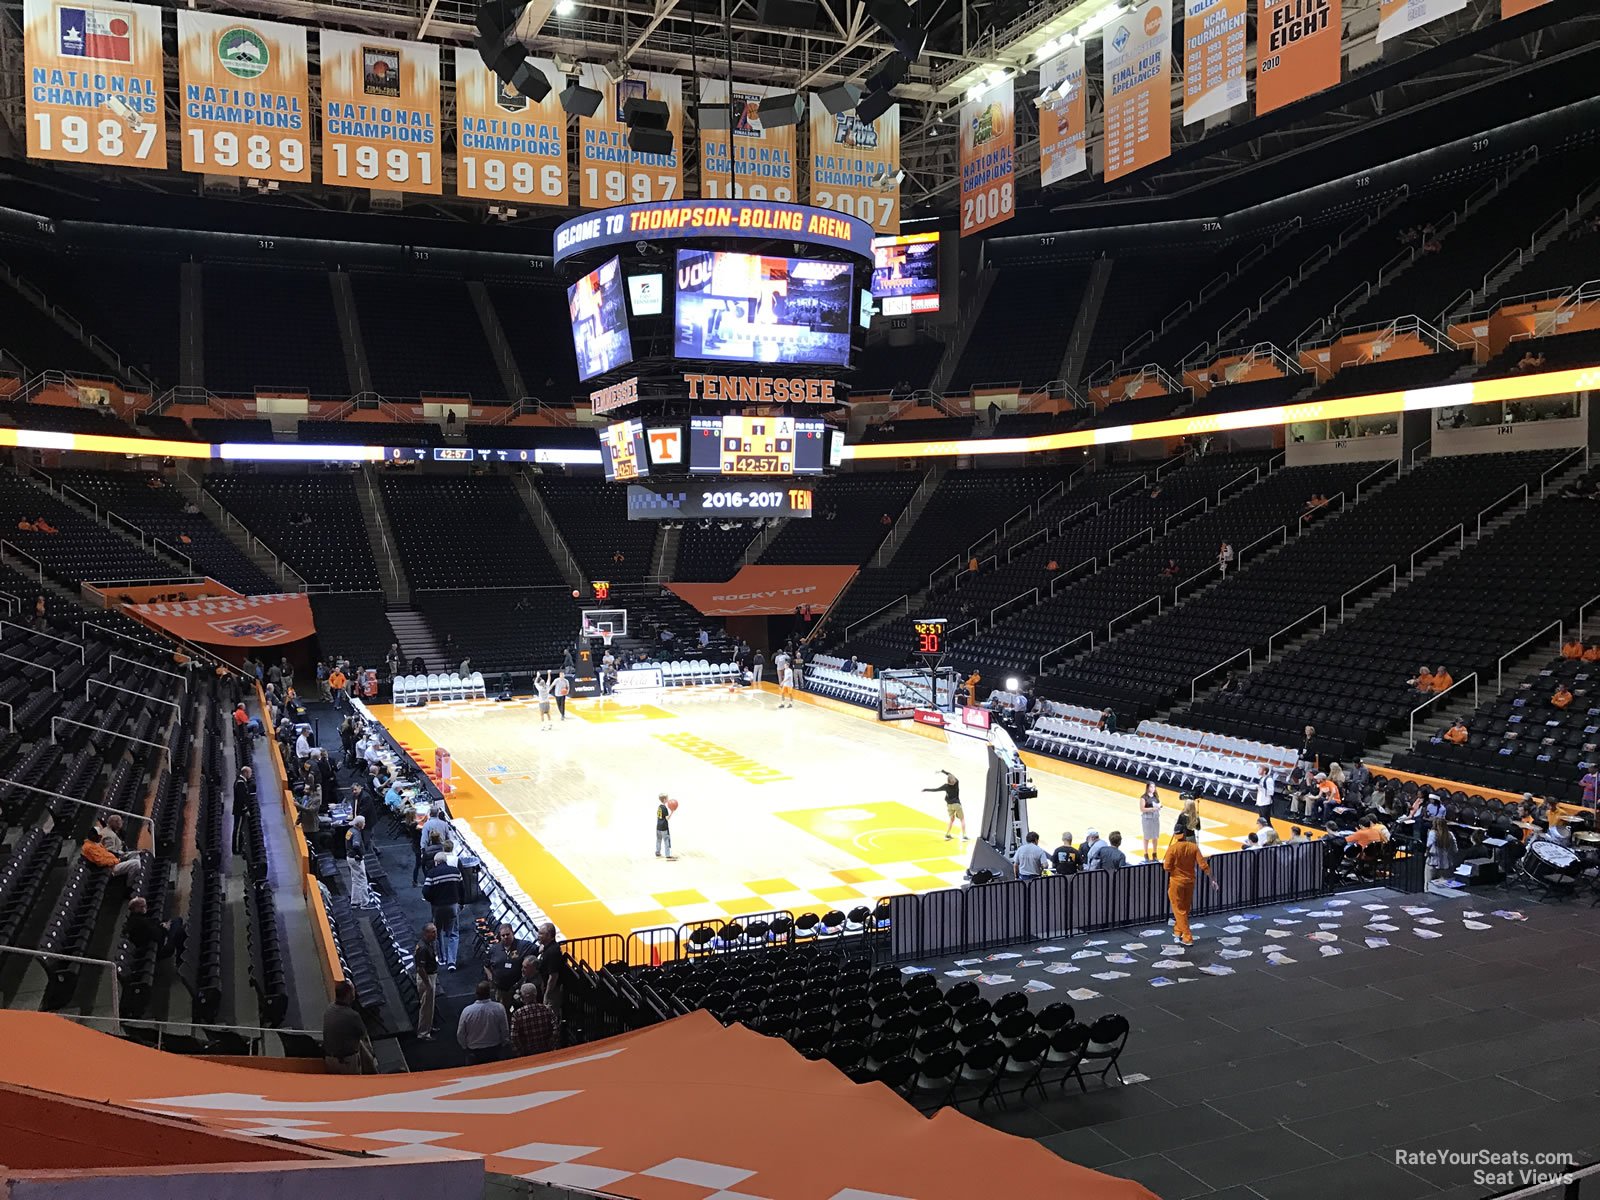 section 131, row 17 seat view  - thompson-boling arena